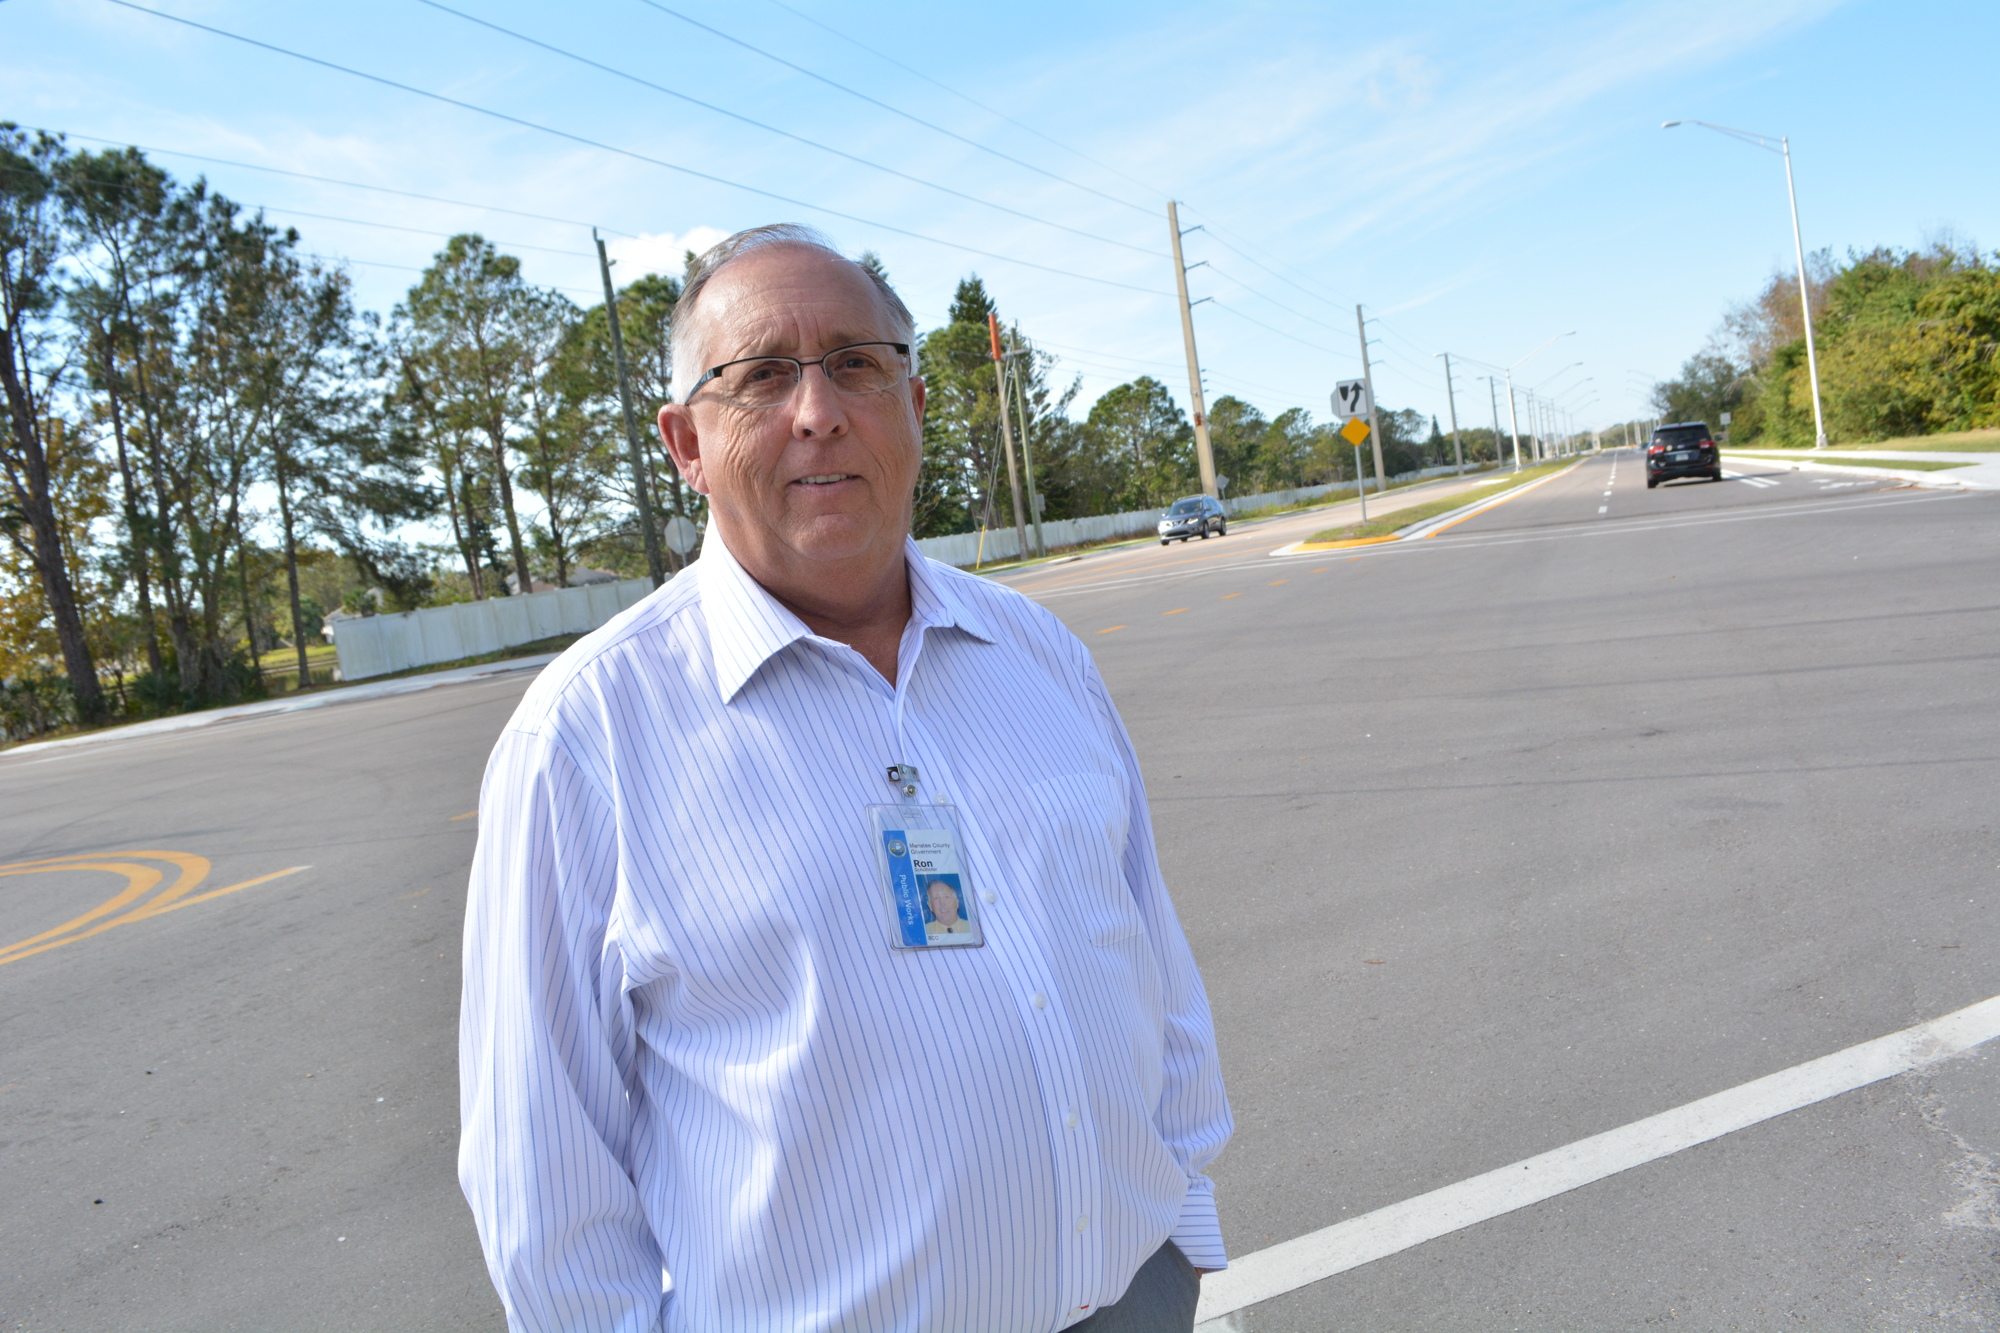 Manatee County Public Works Director Ron Schulhofer says completing the 44th Avenue East extension will be great for relieving traffic on other major roadways and connecting both sides of the county.